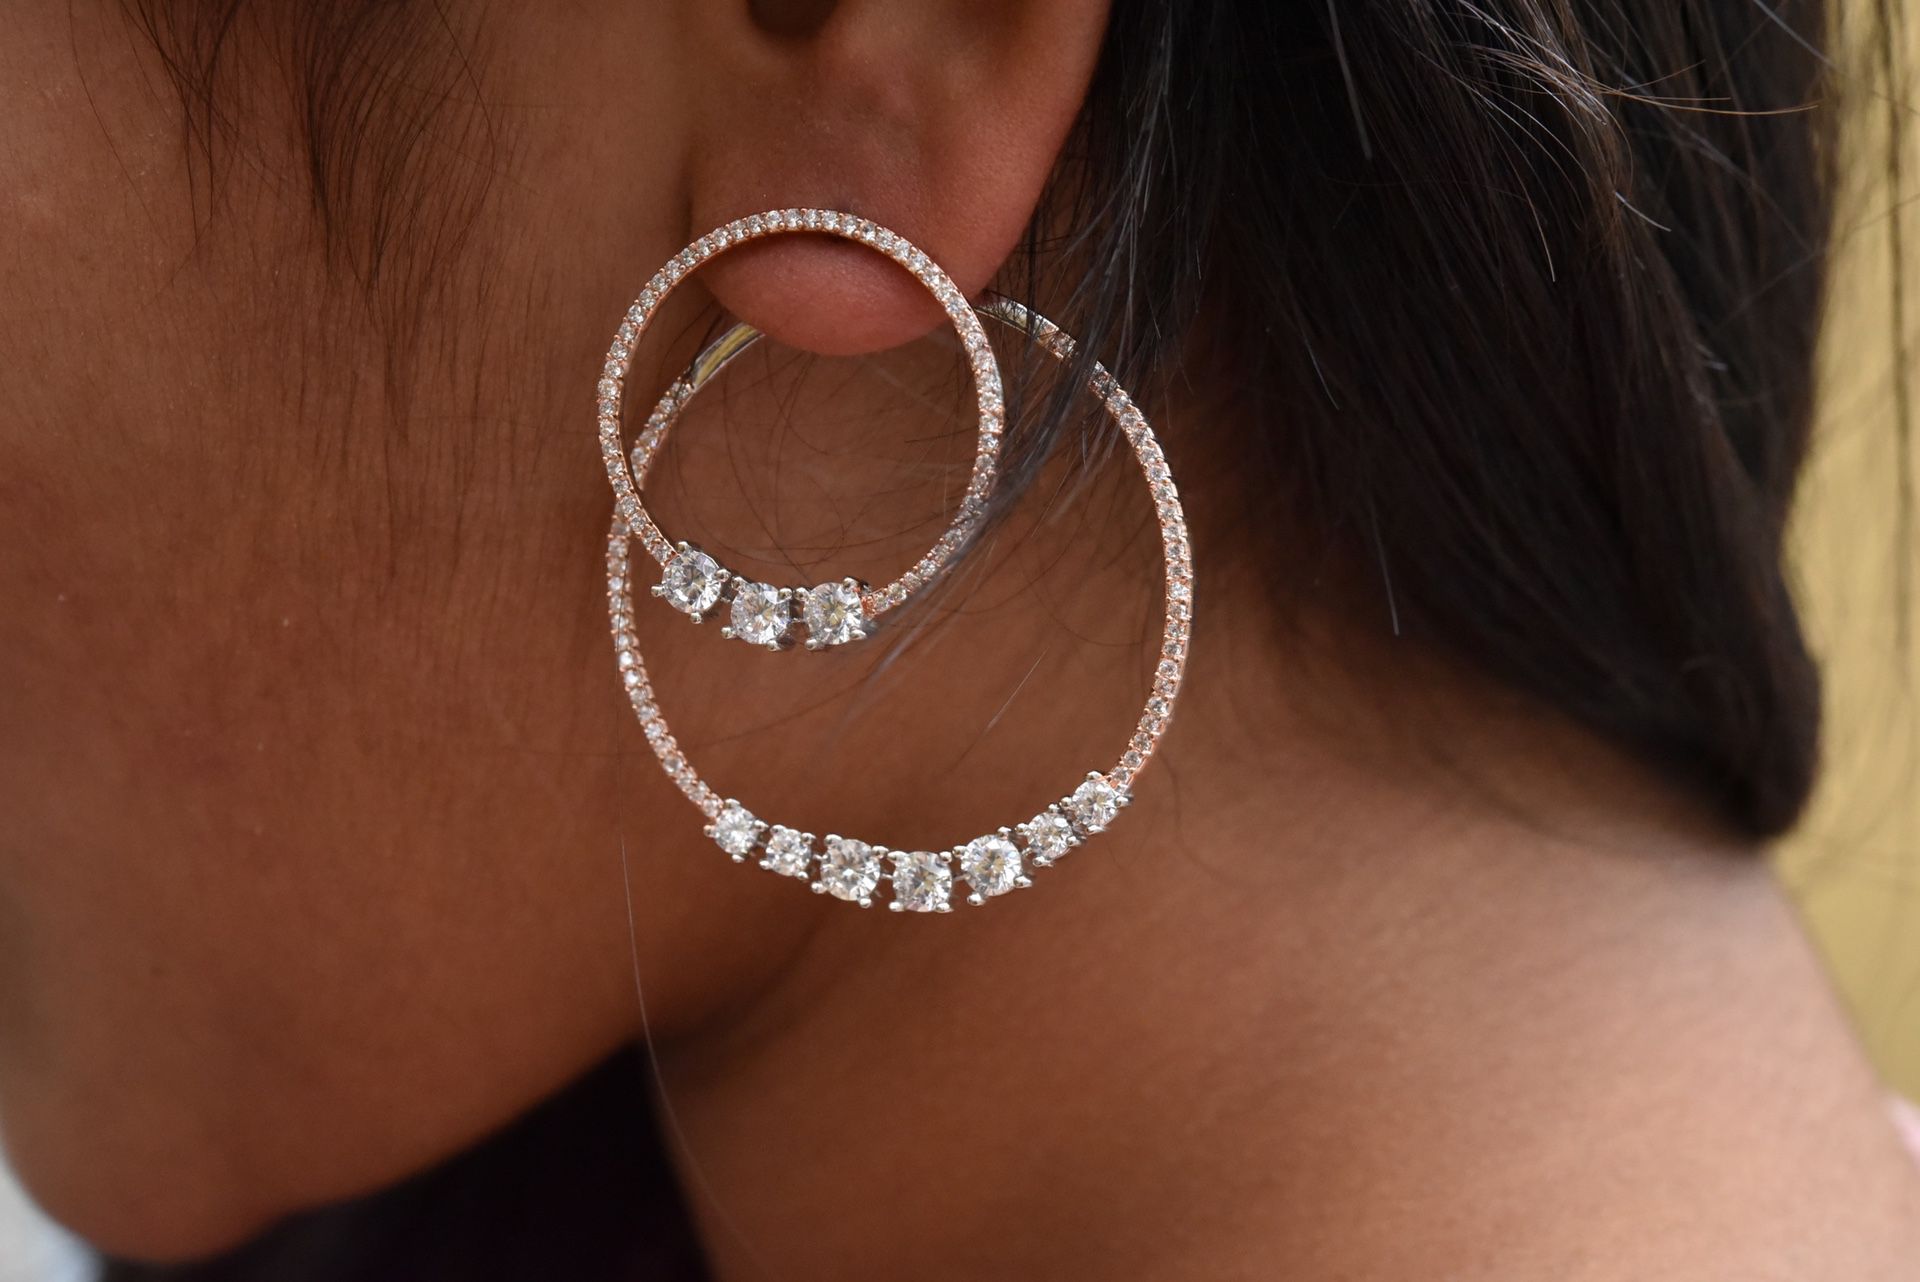 Front and back side hoop earrings with American diamonds